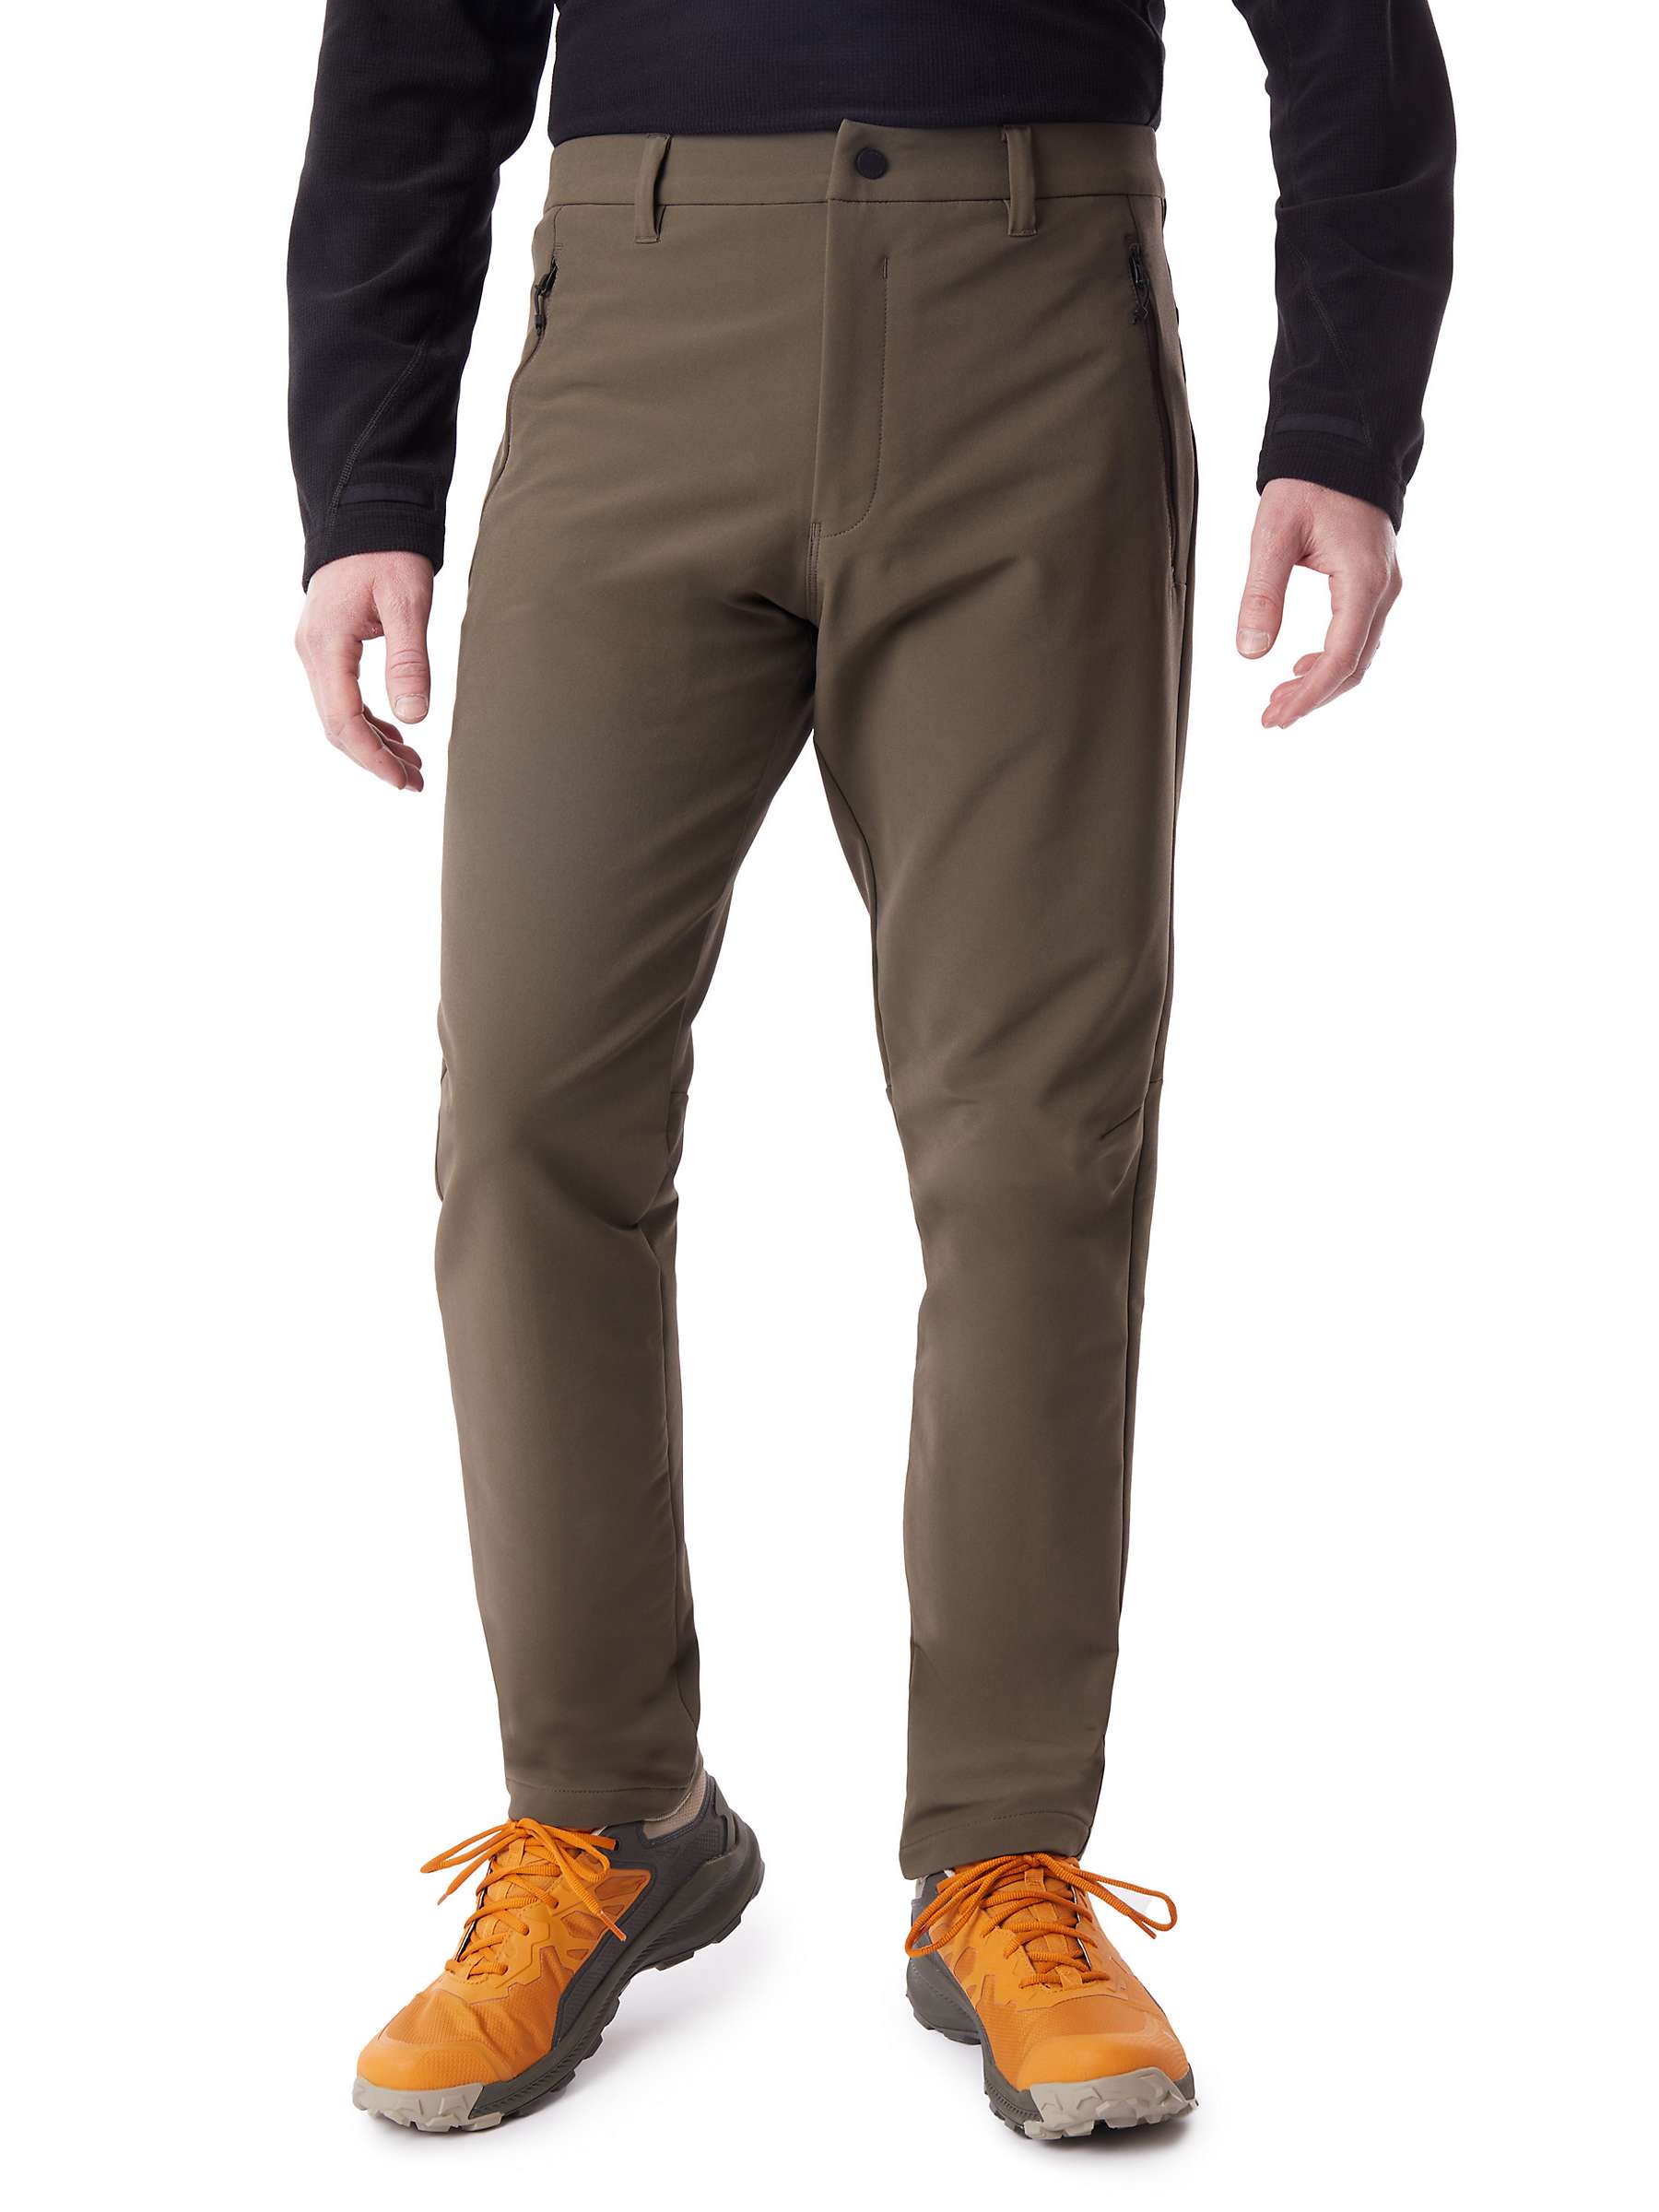 Buy Rohan Striders Hiking Trousers Online at johnlewis.com